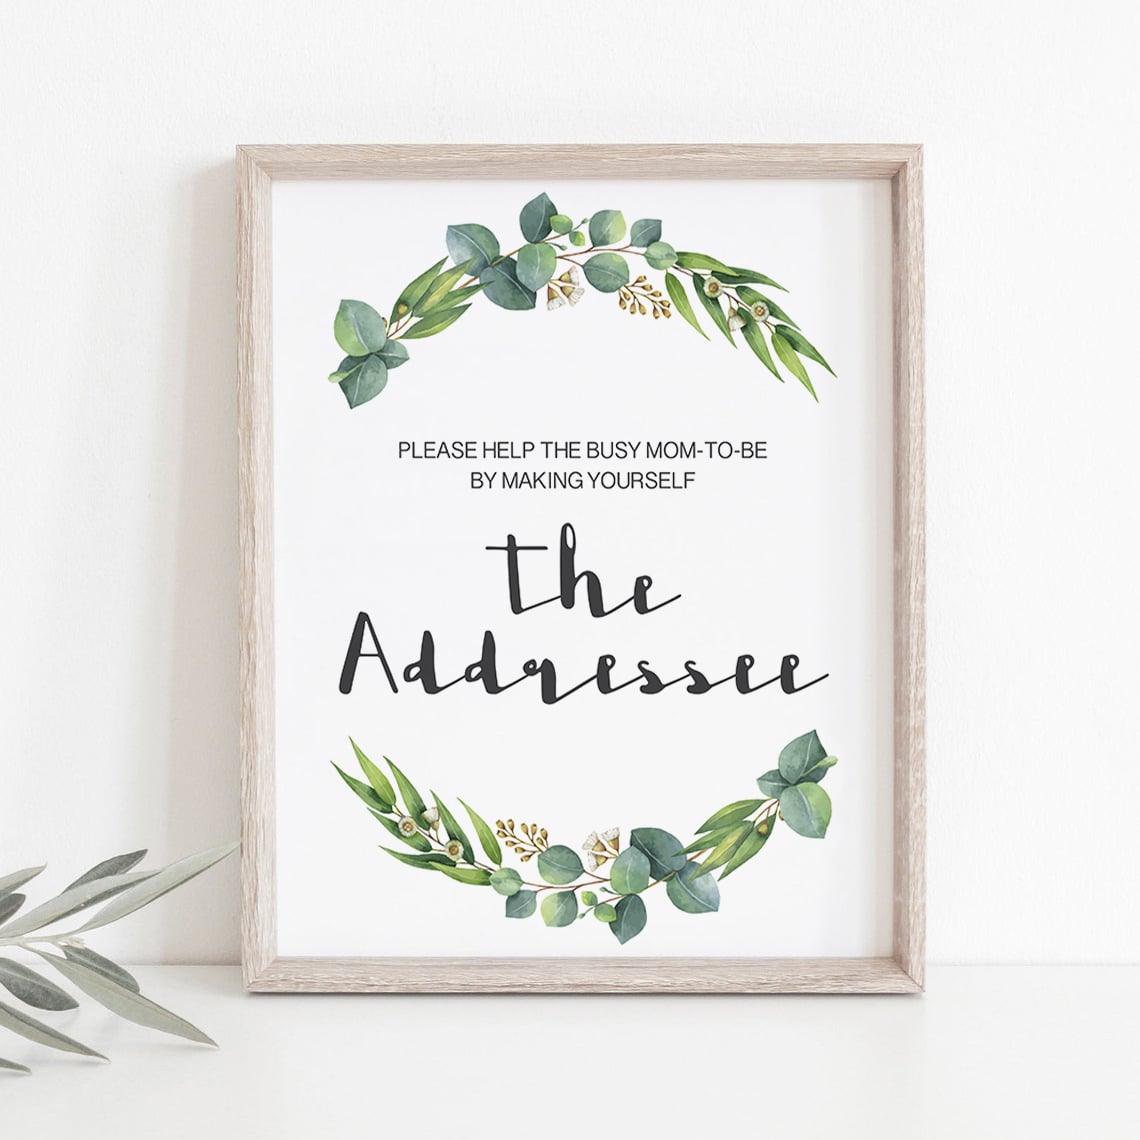 Add your address envelope sign for greenery theme baby shower by LittleSizzle